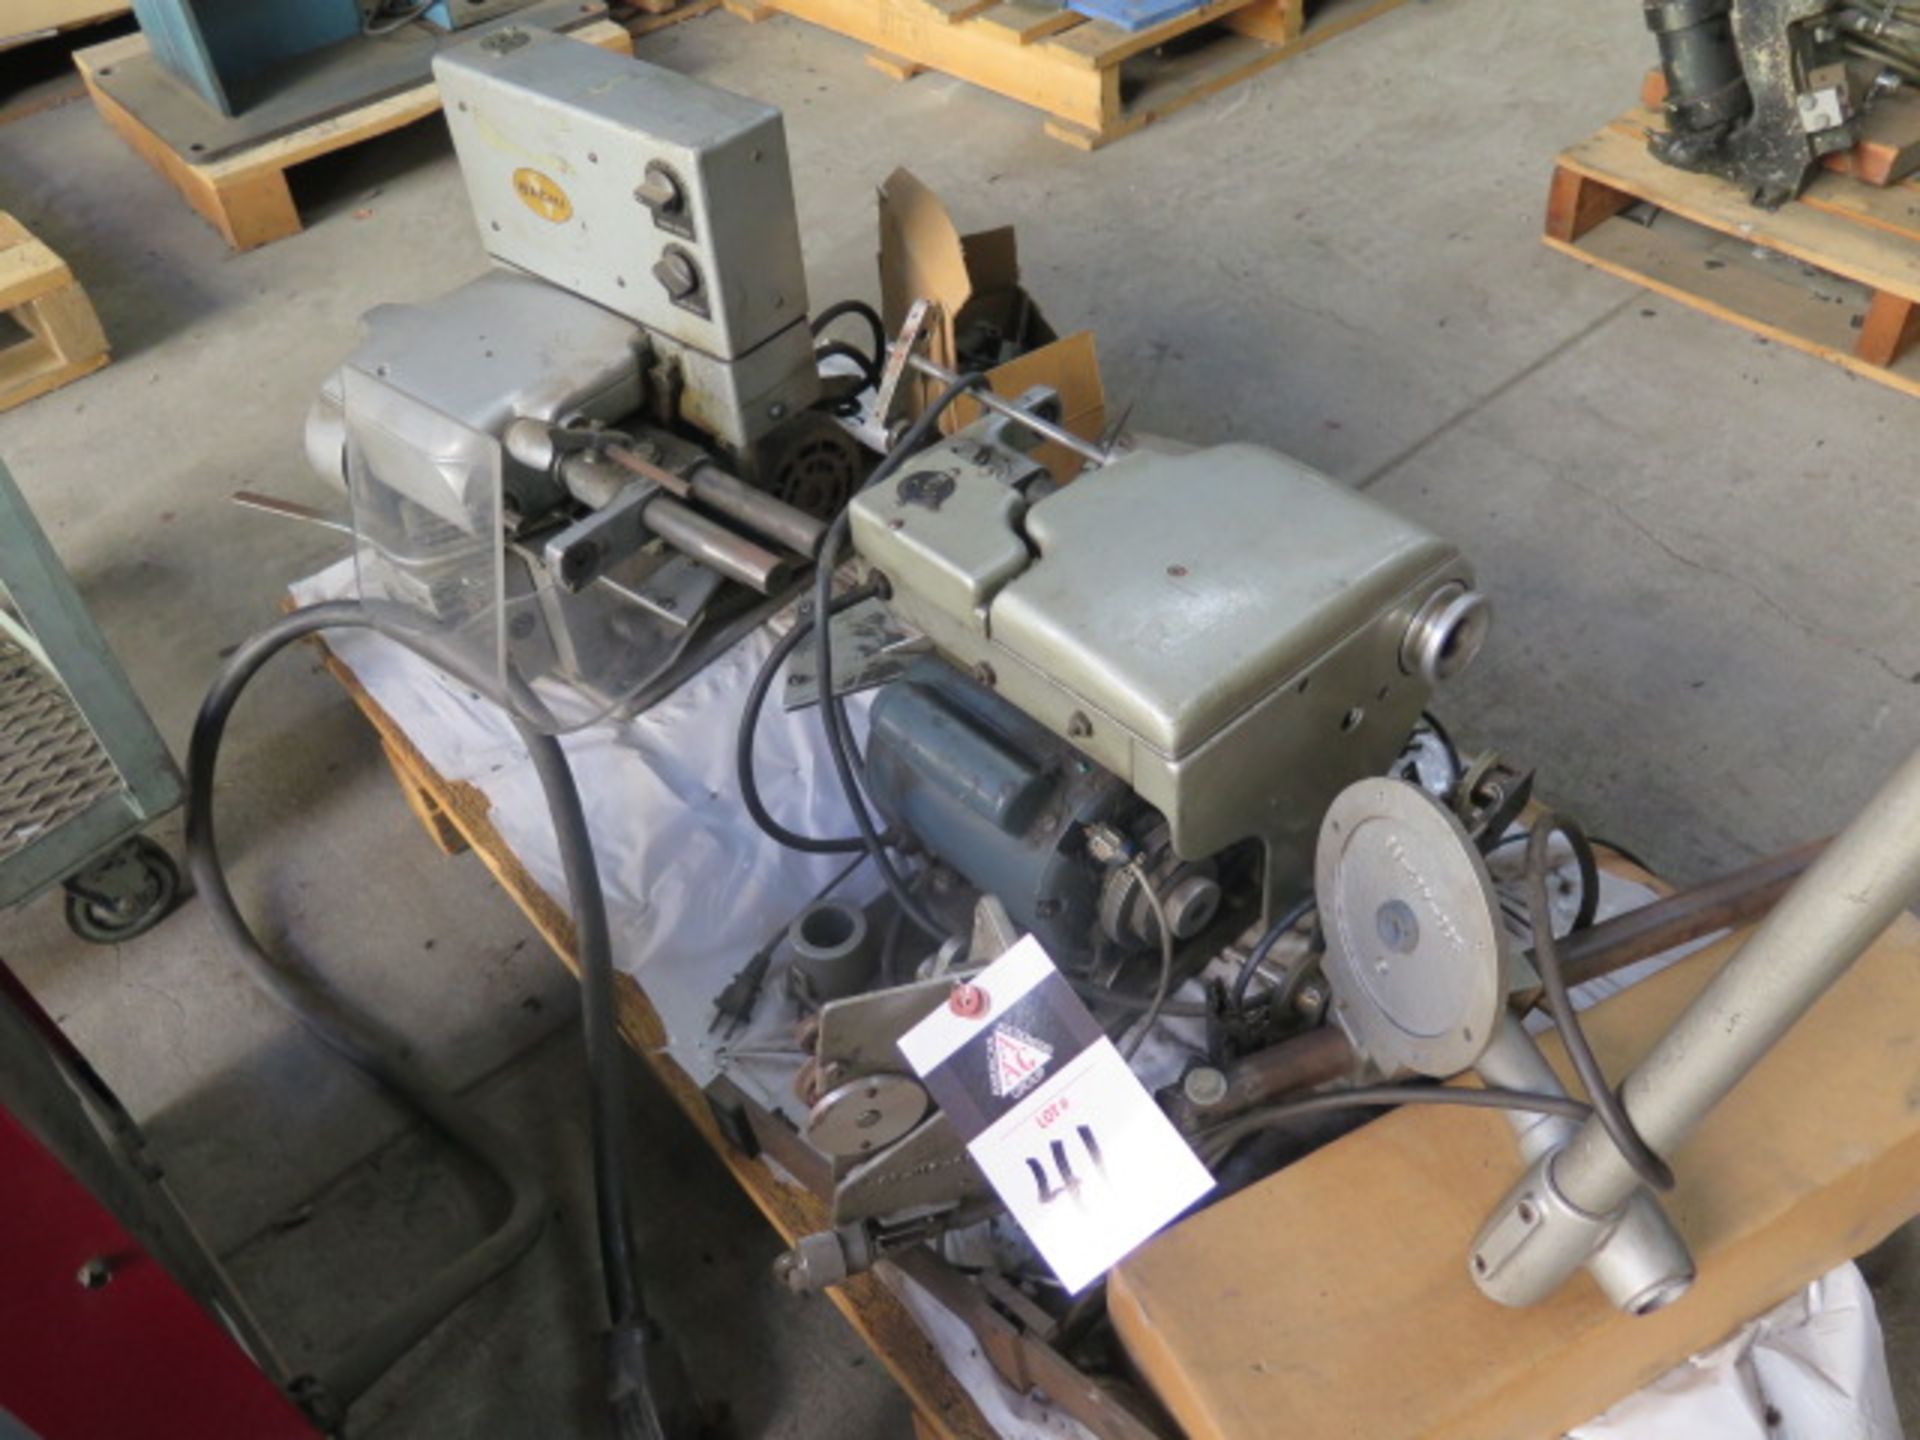 Bachi mdl. 115D E/C SCR Coil Winder s/n 3633 and Bachi Winder Parts (SOLD AS-IS - NO WARRANTY)